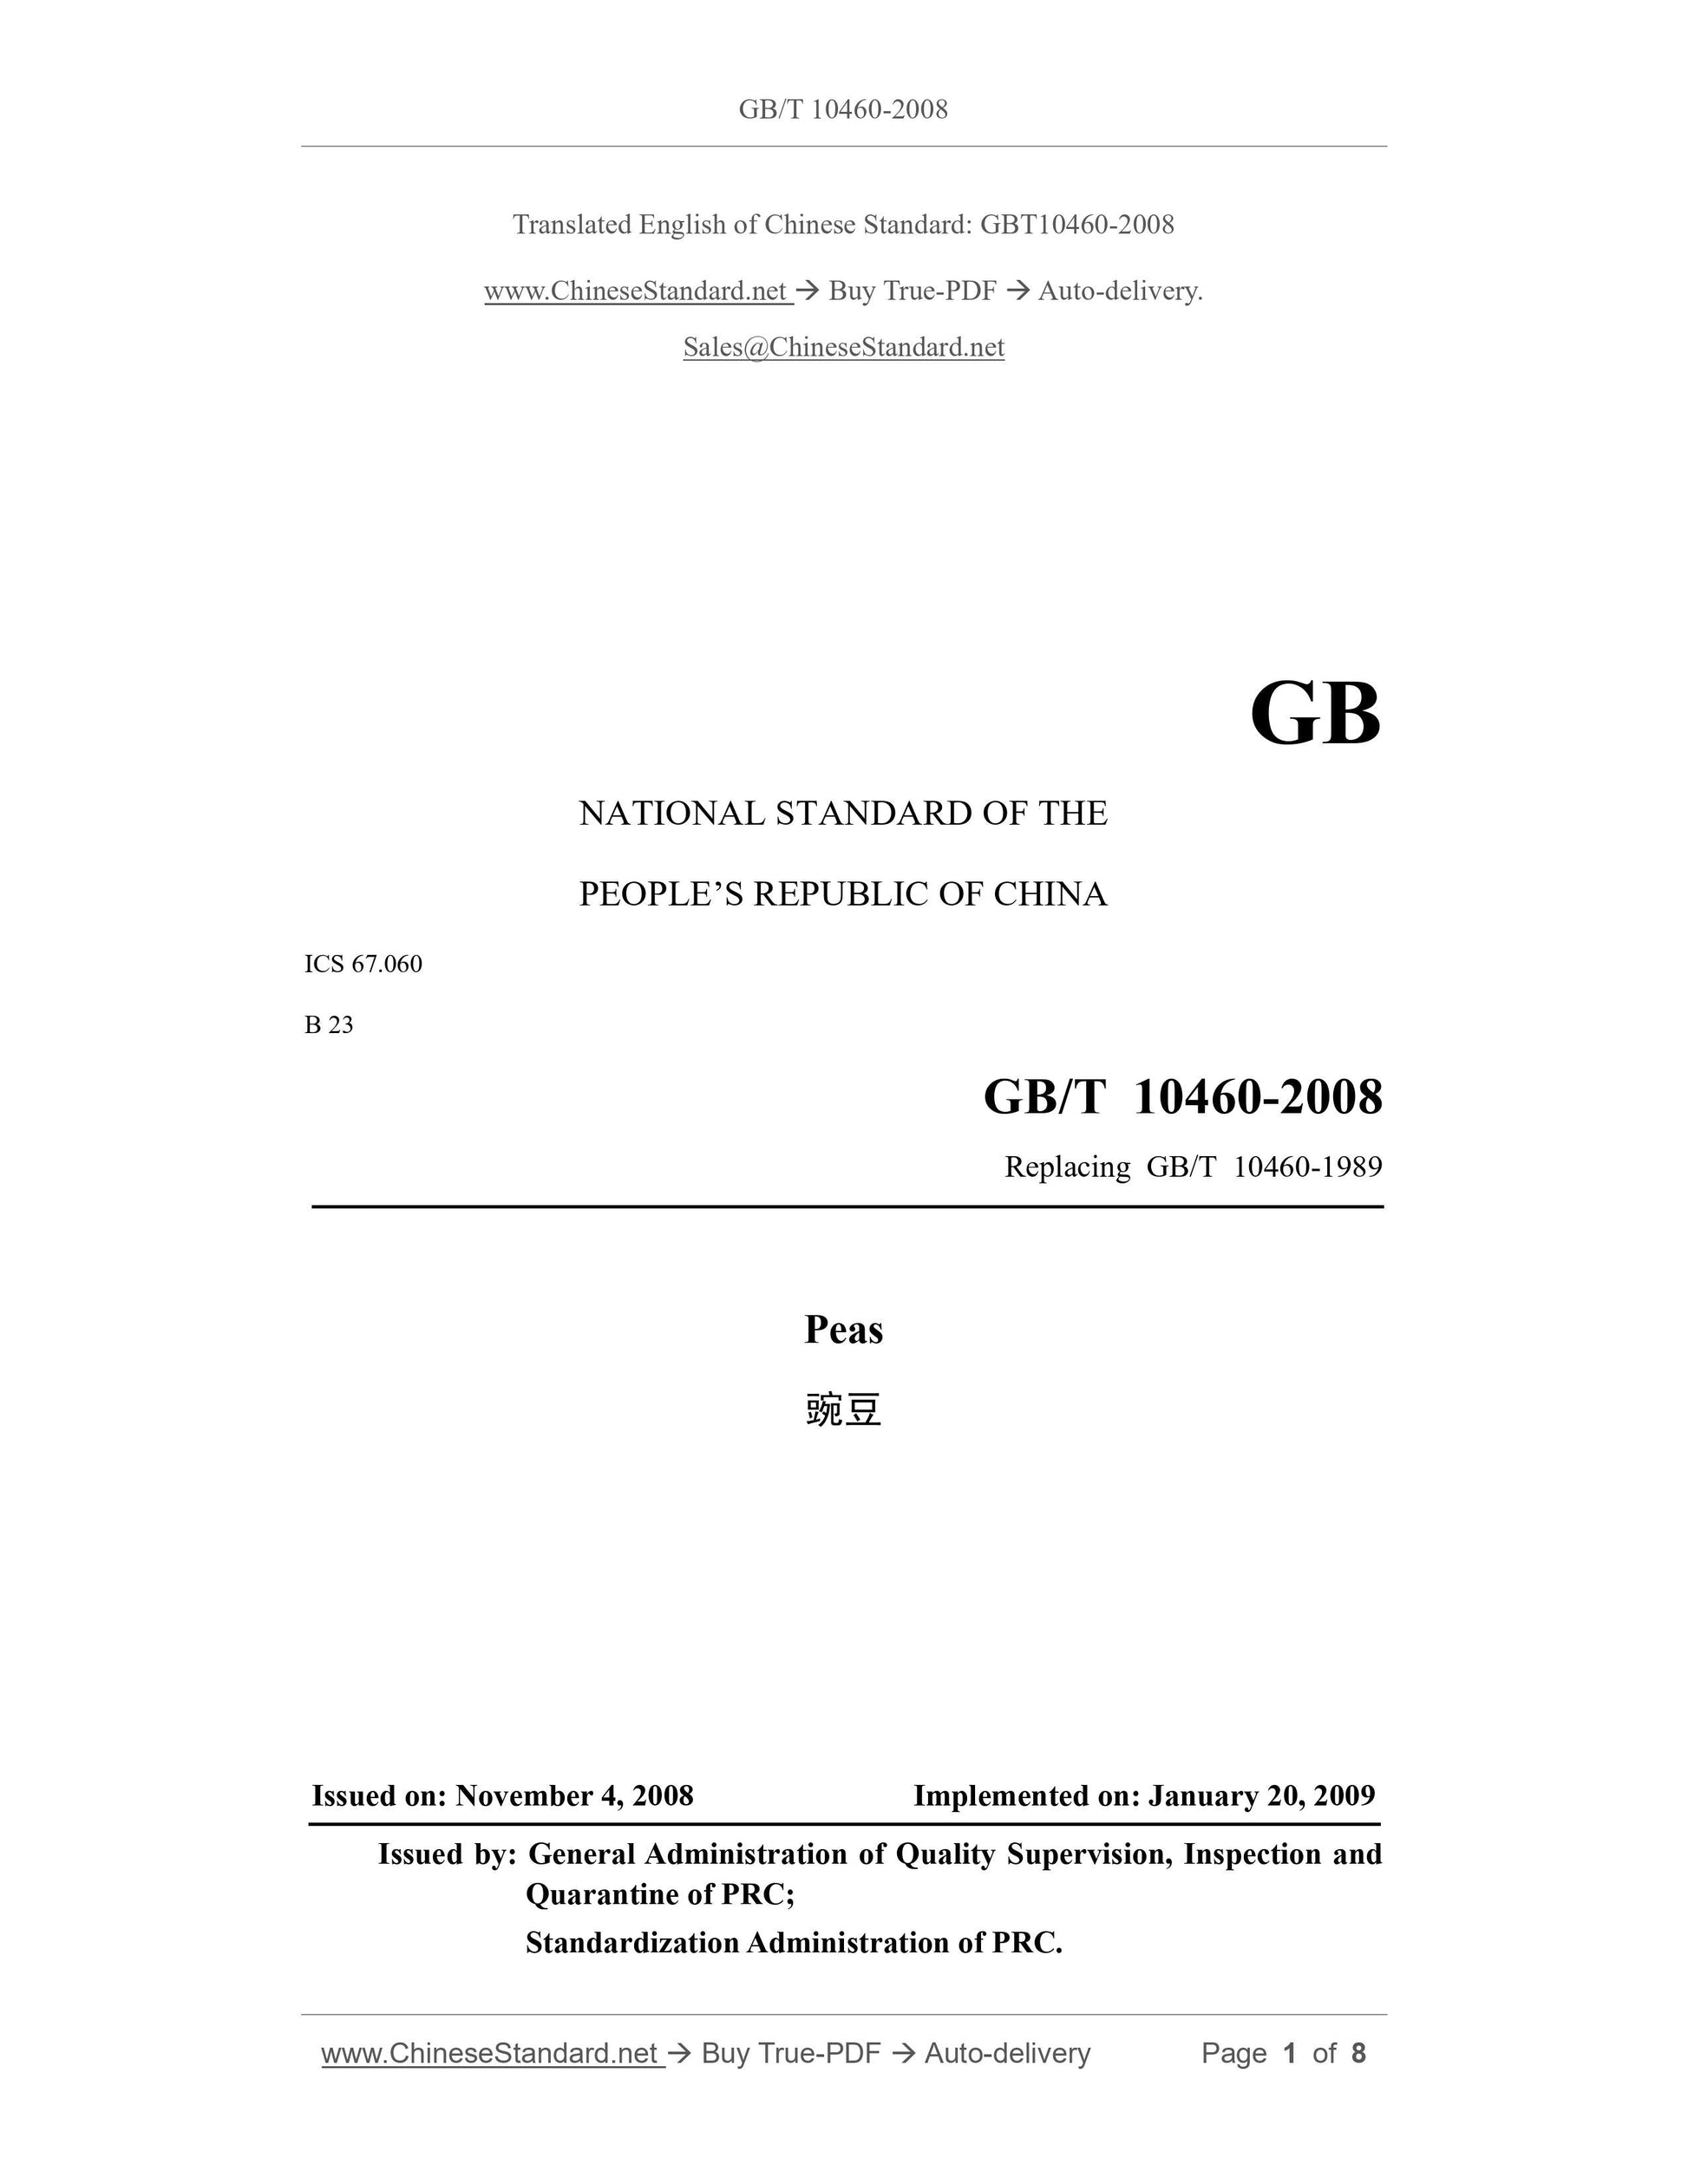 GB/T 10460-2008 Page 1